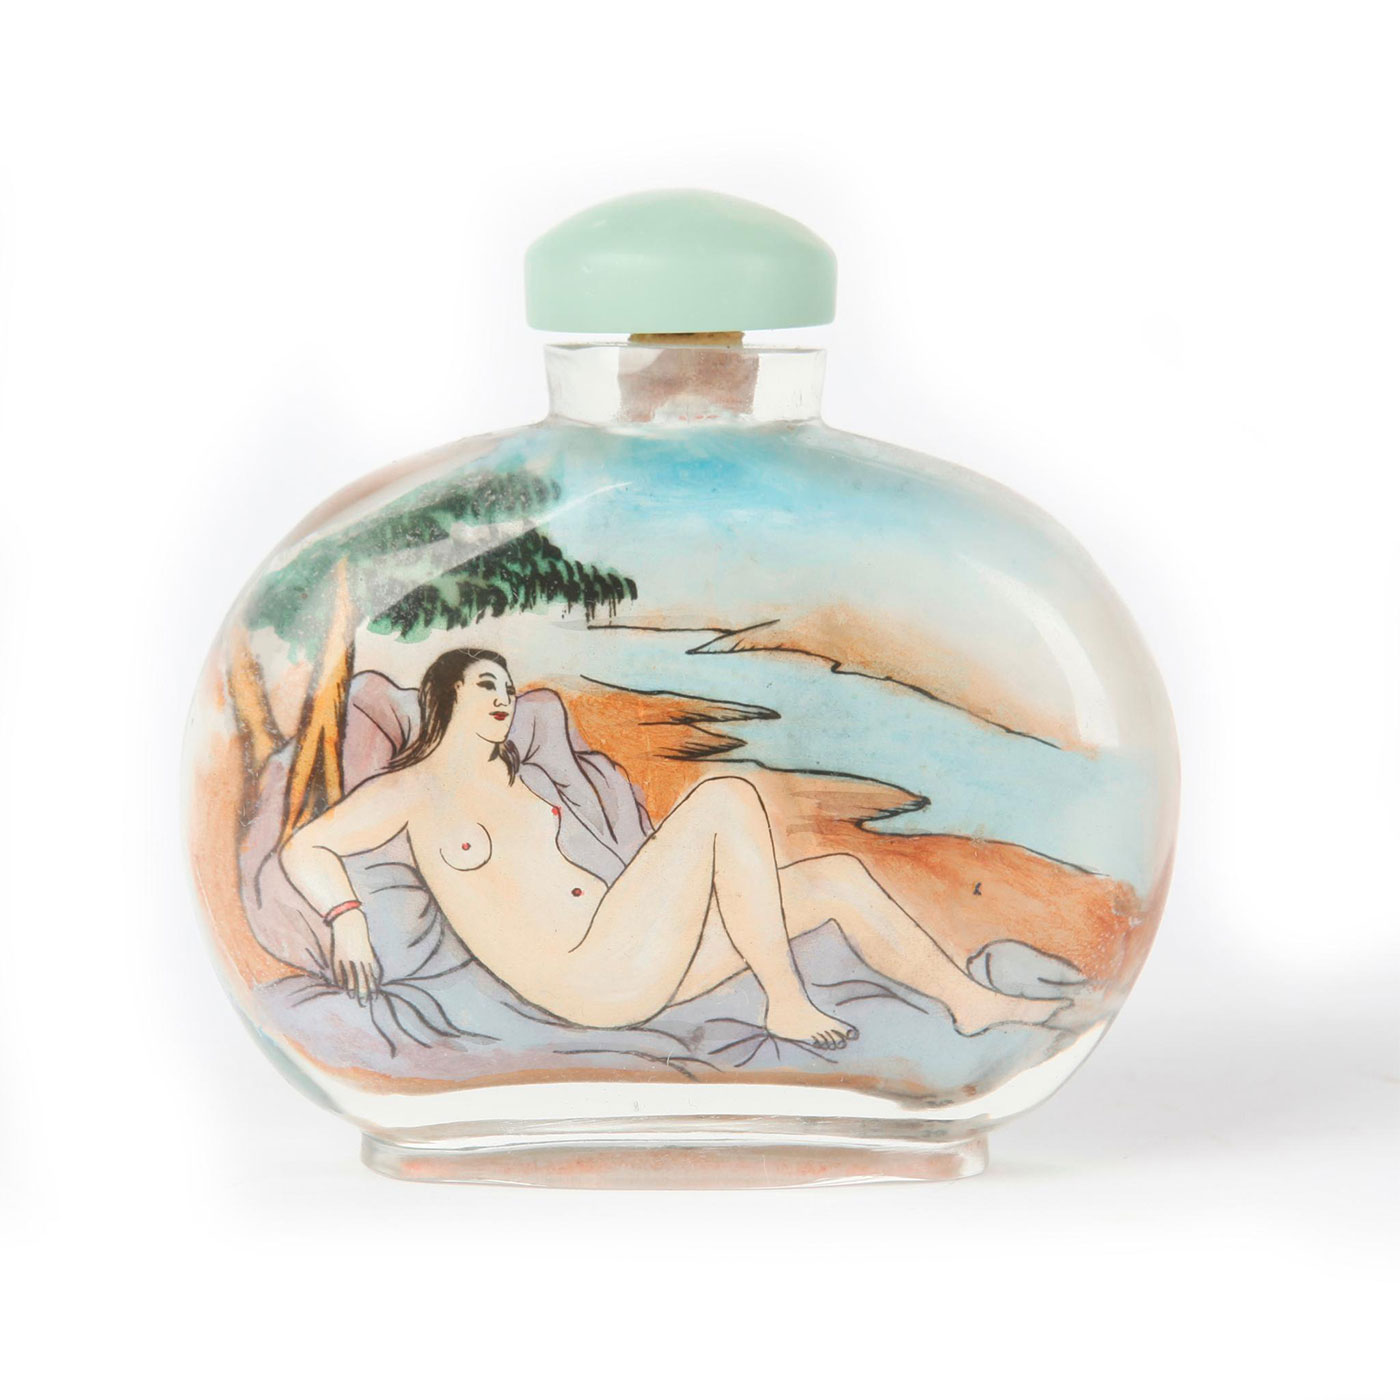 19TH C. GLASS CHINESE PAINTED SNUFF BOTTLE - Image 2 of 3